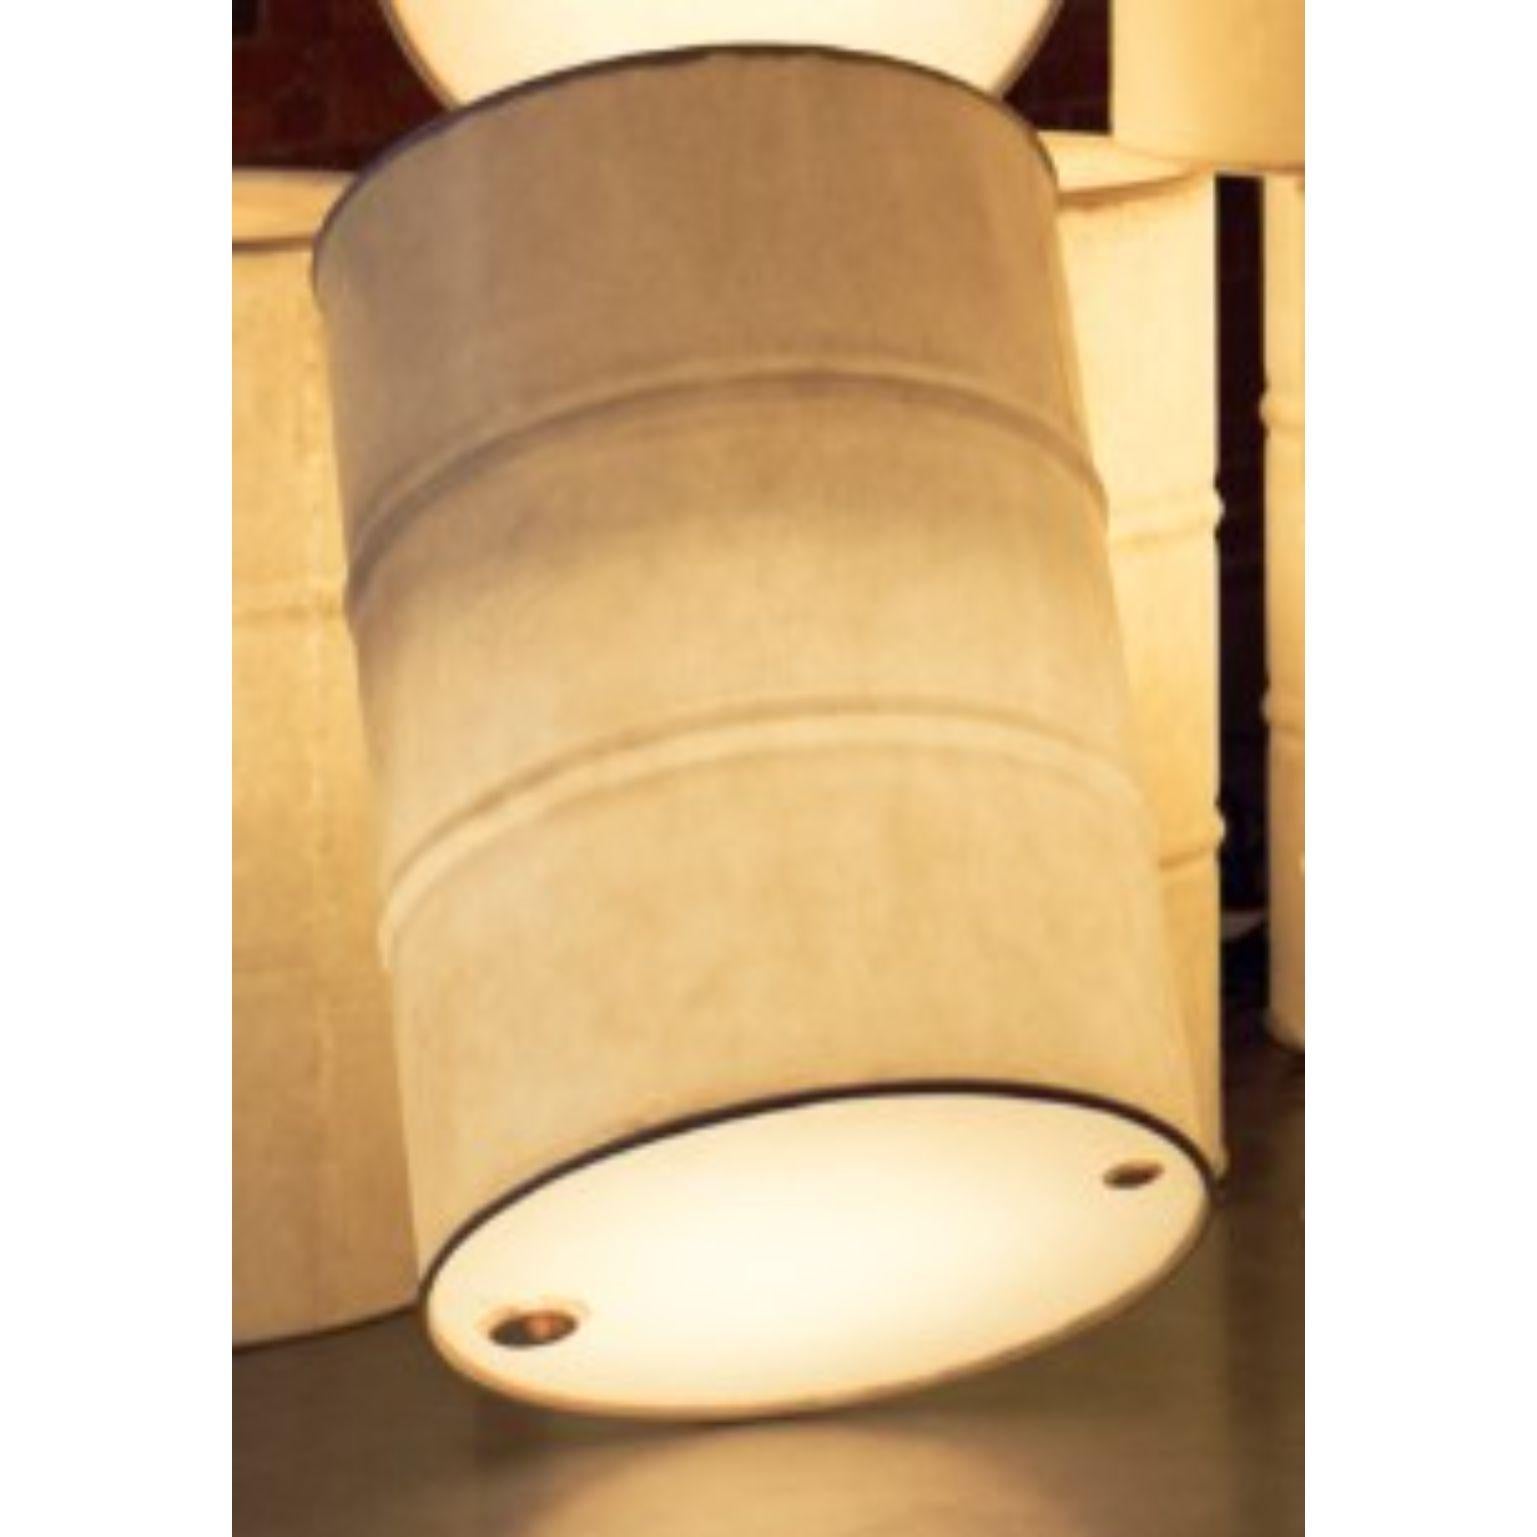 Light pollution Tank by Atelier Haute Cuisine
Dimensions: 90 cm x 58 cm
Materials: Fiberglass
 
Changing the polluting image of oil barrels by transforming them into bright light sculptures. Or is this excessive and obstrusive artificial light in an